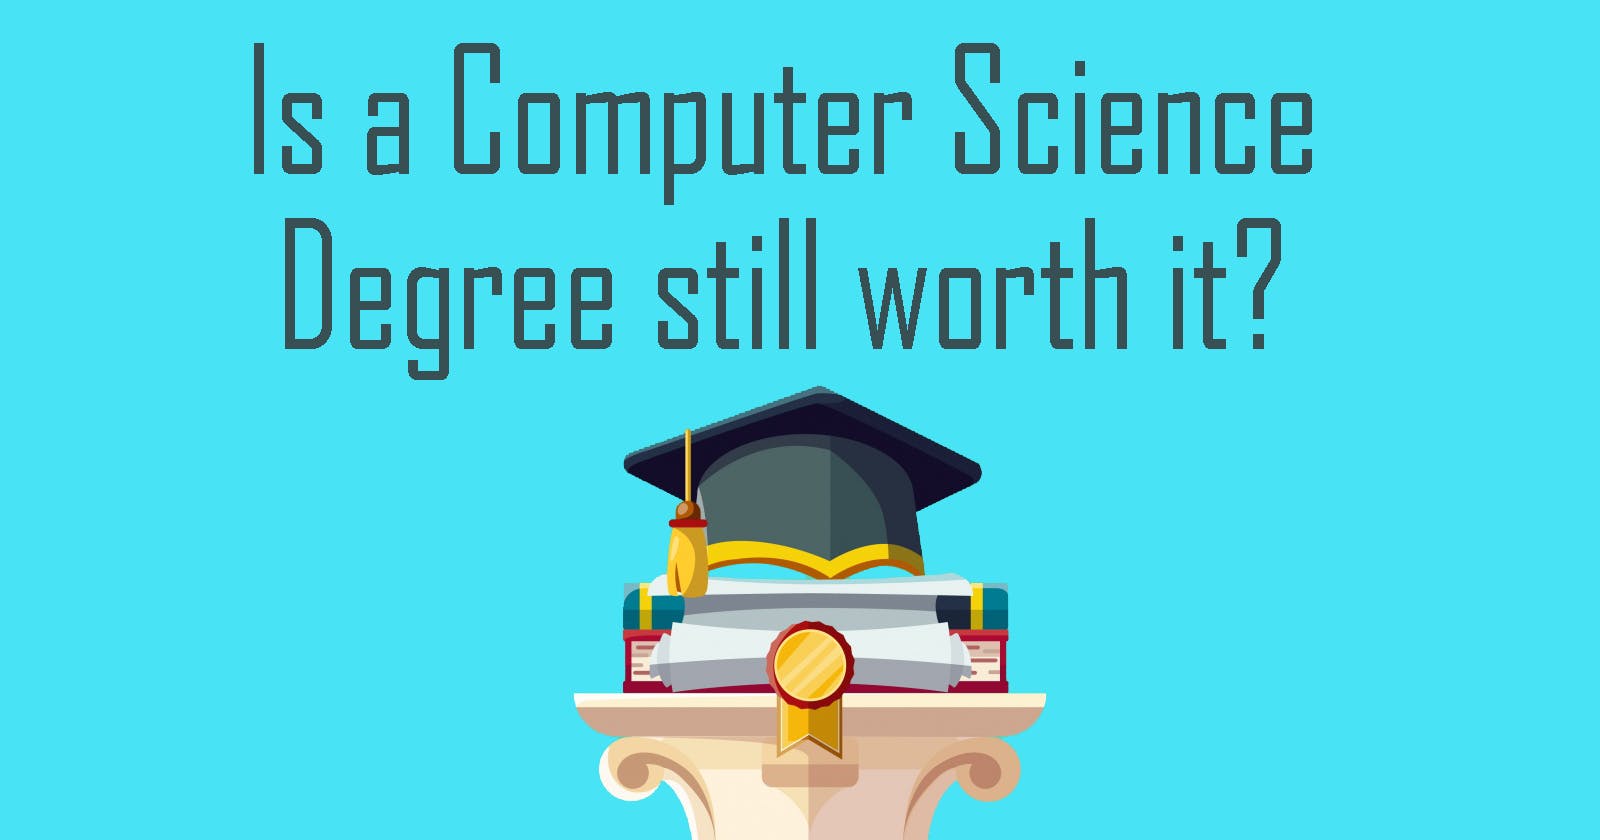 Is a Computer Science Degree still worth it?